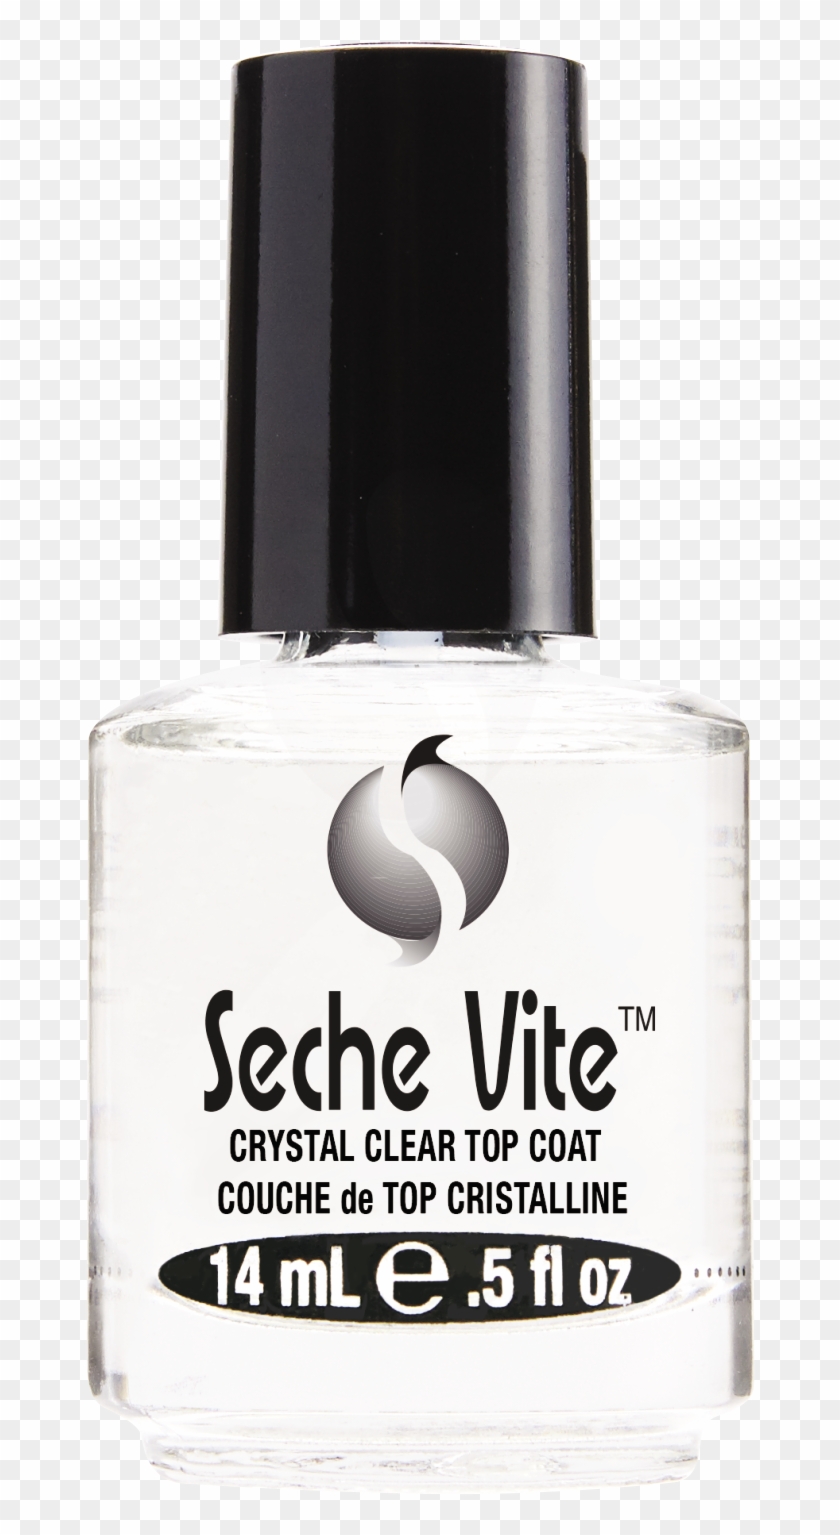 Seche Vite Was The First Patented Single Procedure - Seche Vite Was The First Patented Single Procedure #1526337